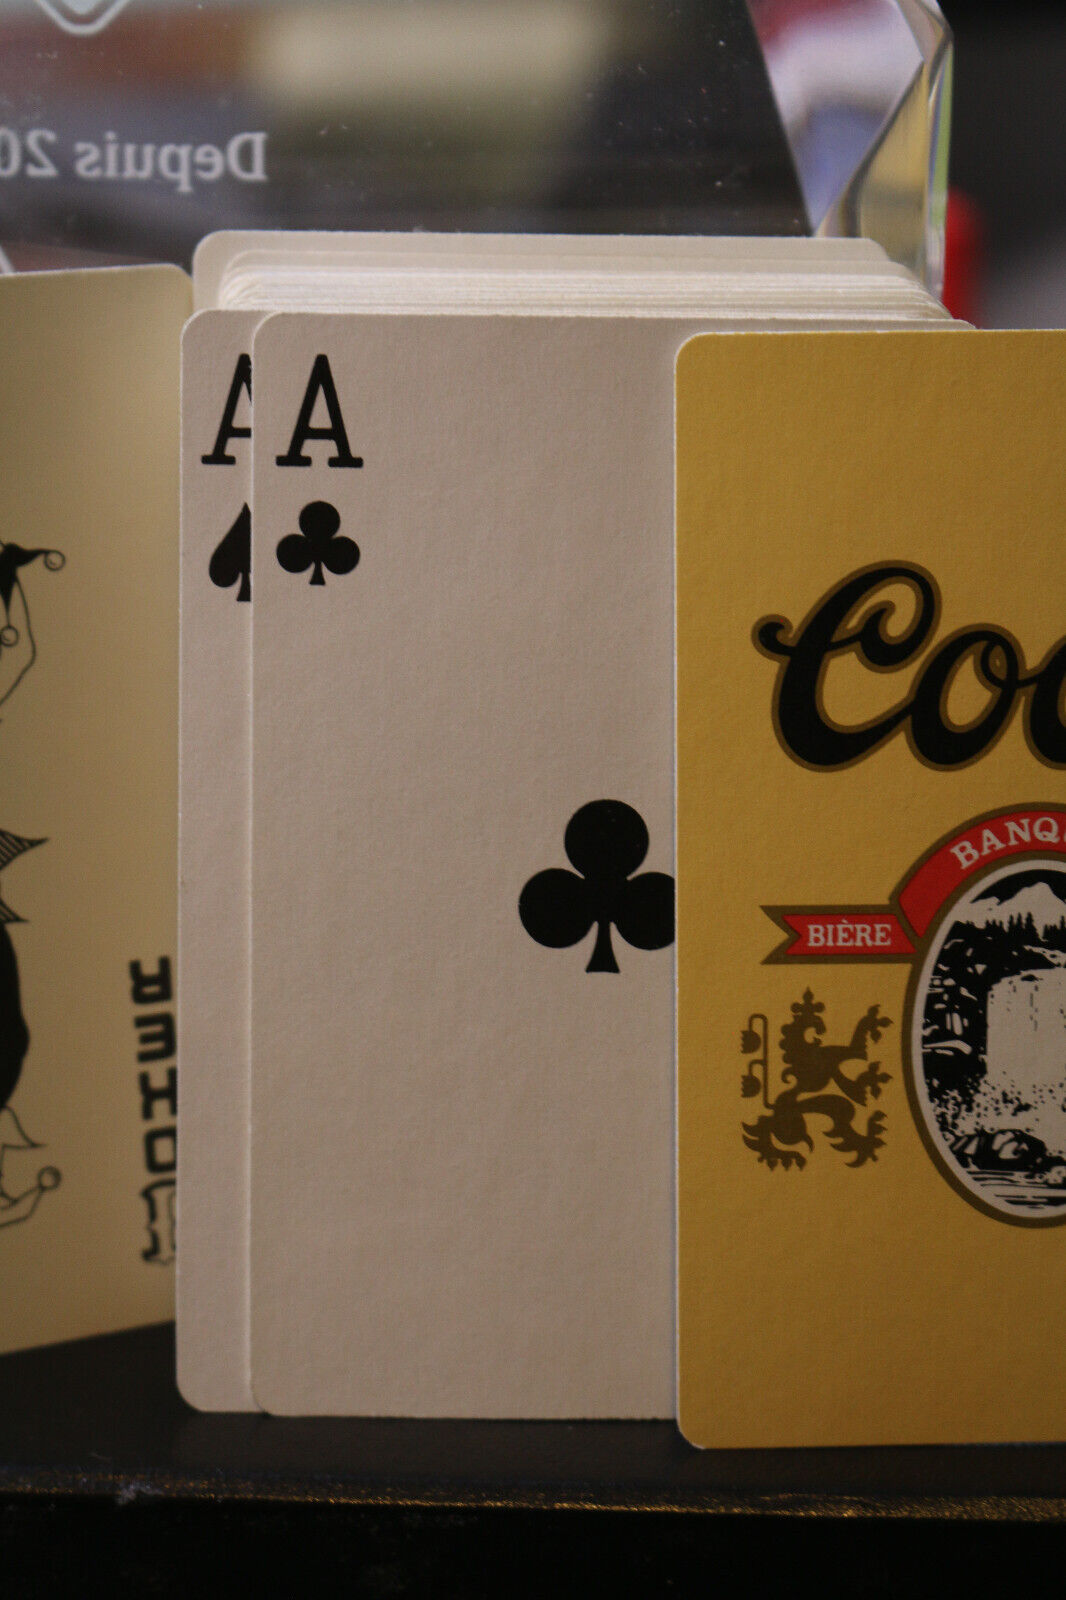 Vintage Deck Of Coors Beer Playing Cards